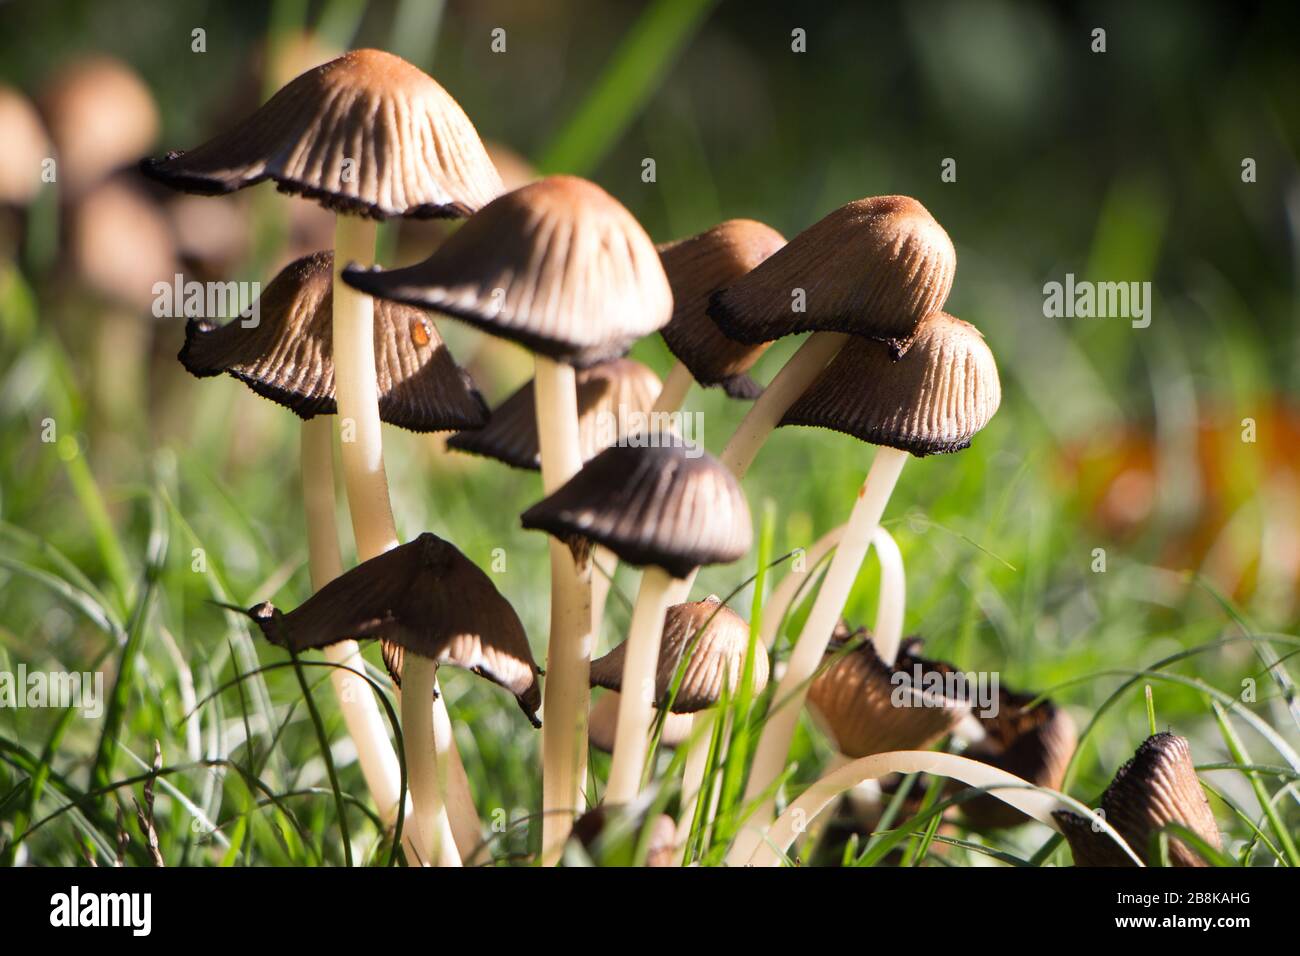 Many mushrooms with grass background Stock Photo